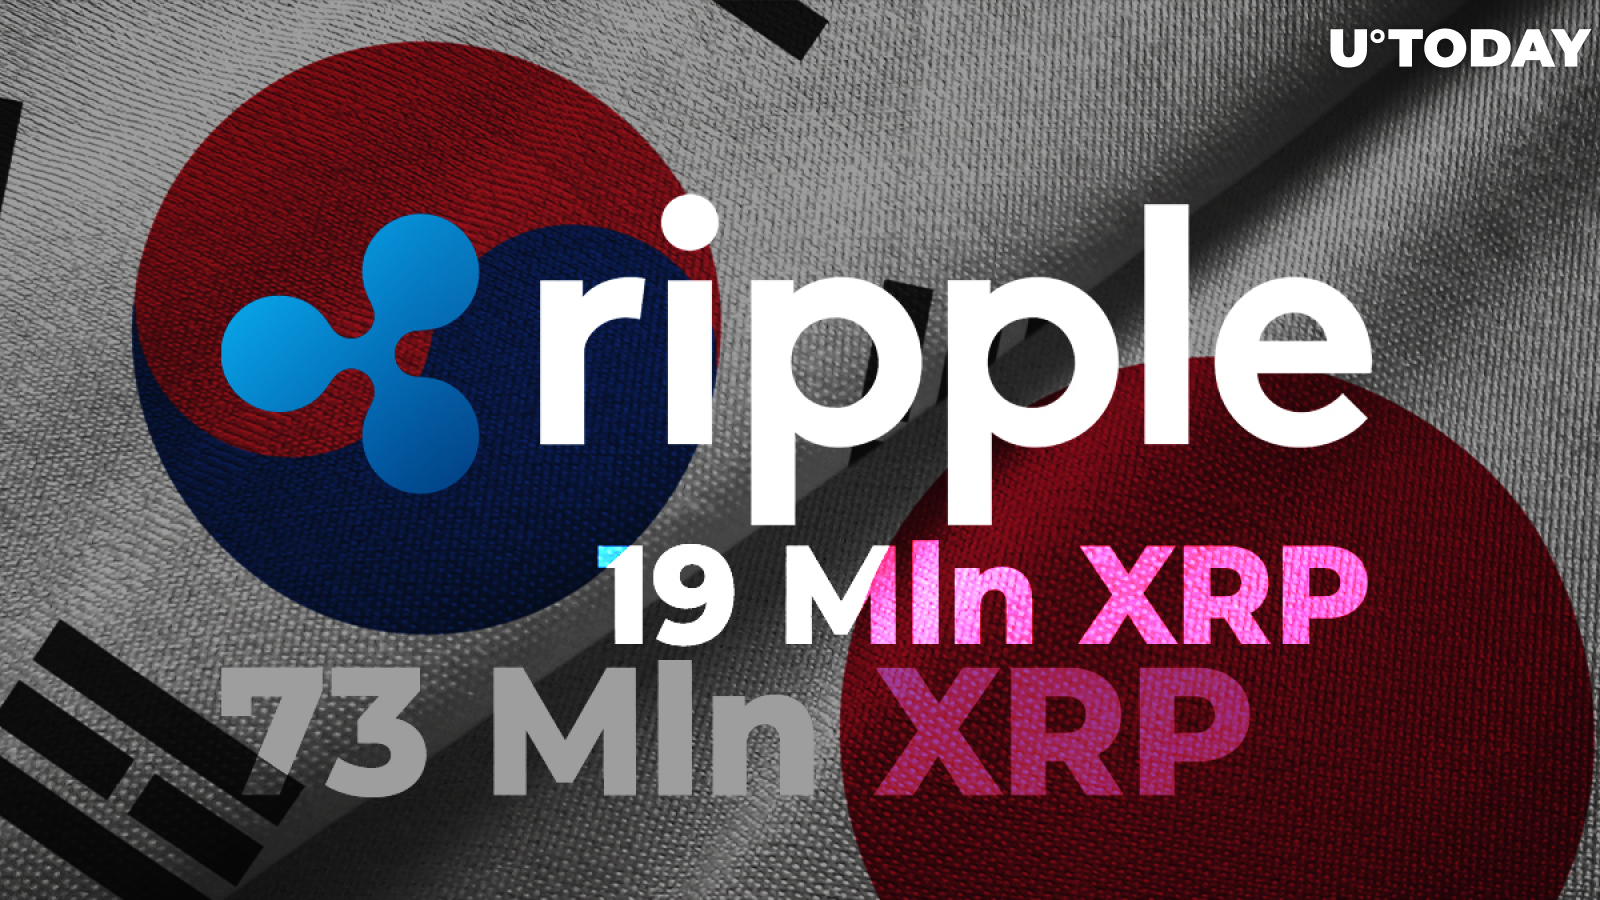 73 Mln XRP Is Sent Through Ripple's Unannounced Asian ODL Corridor